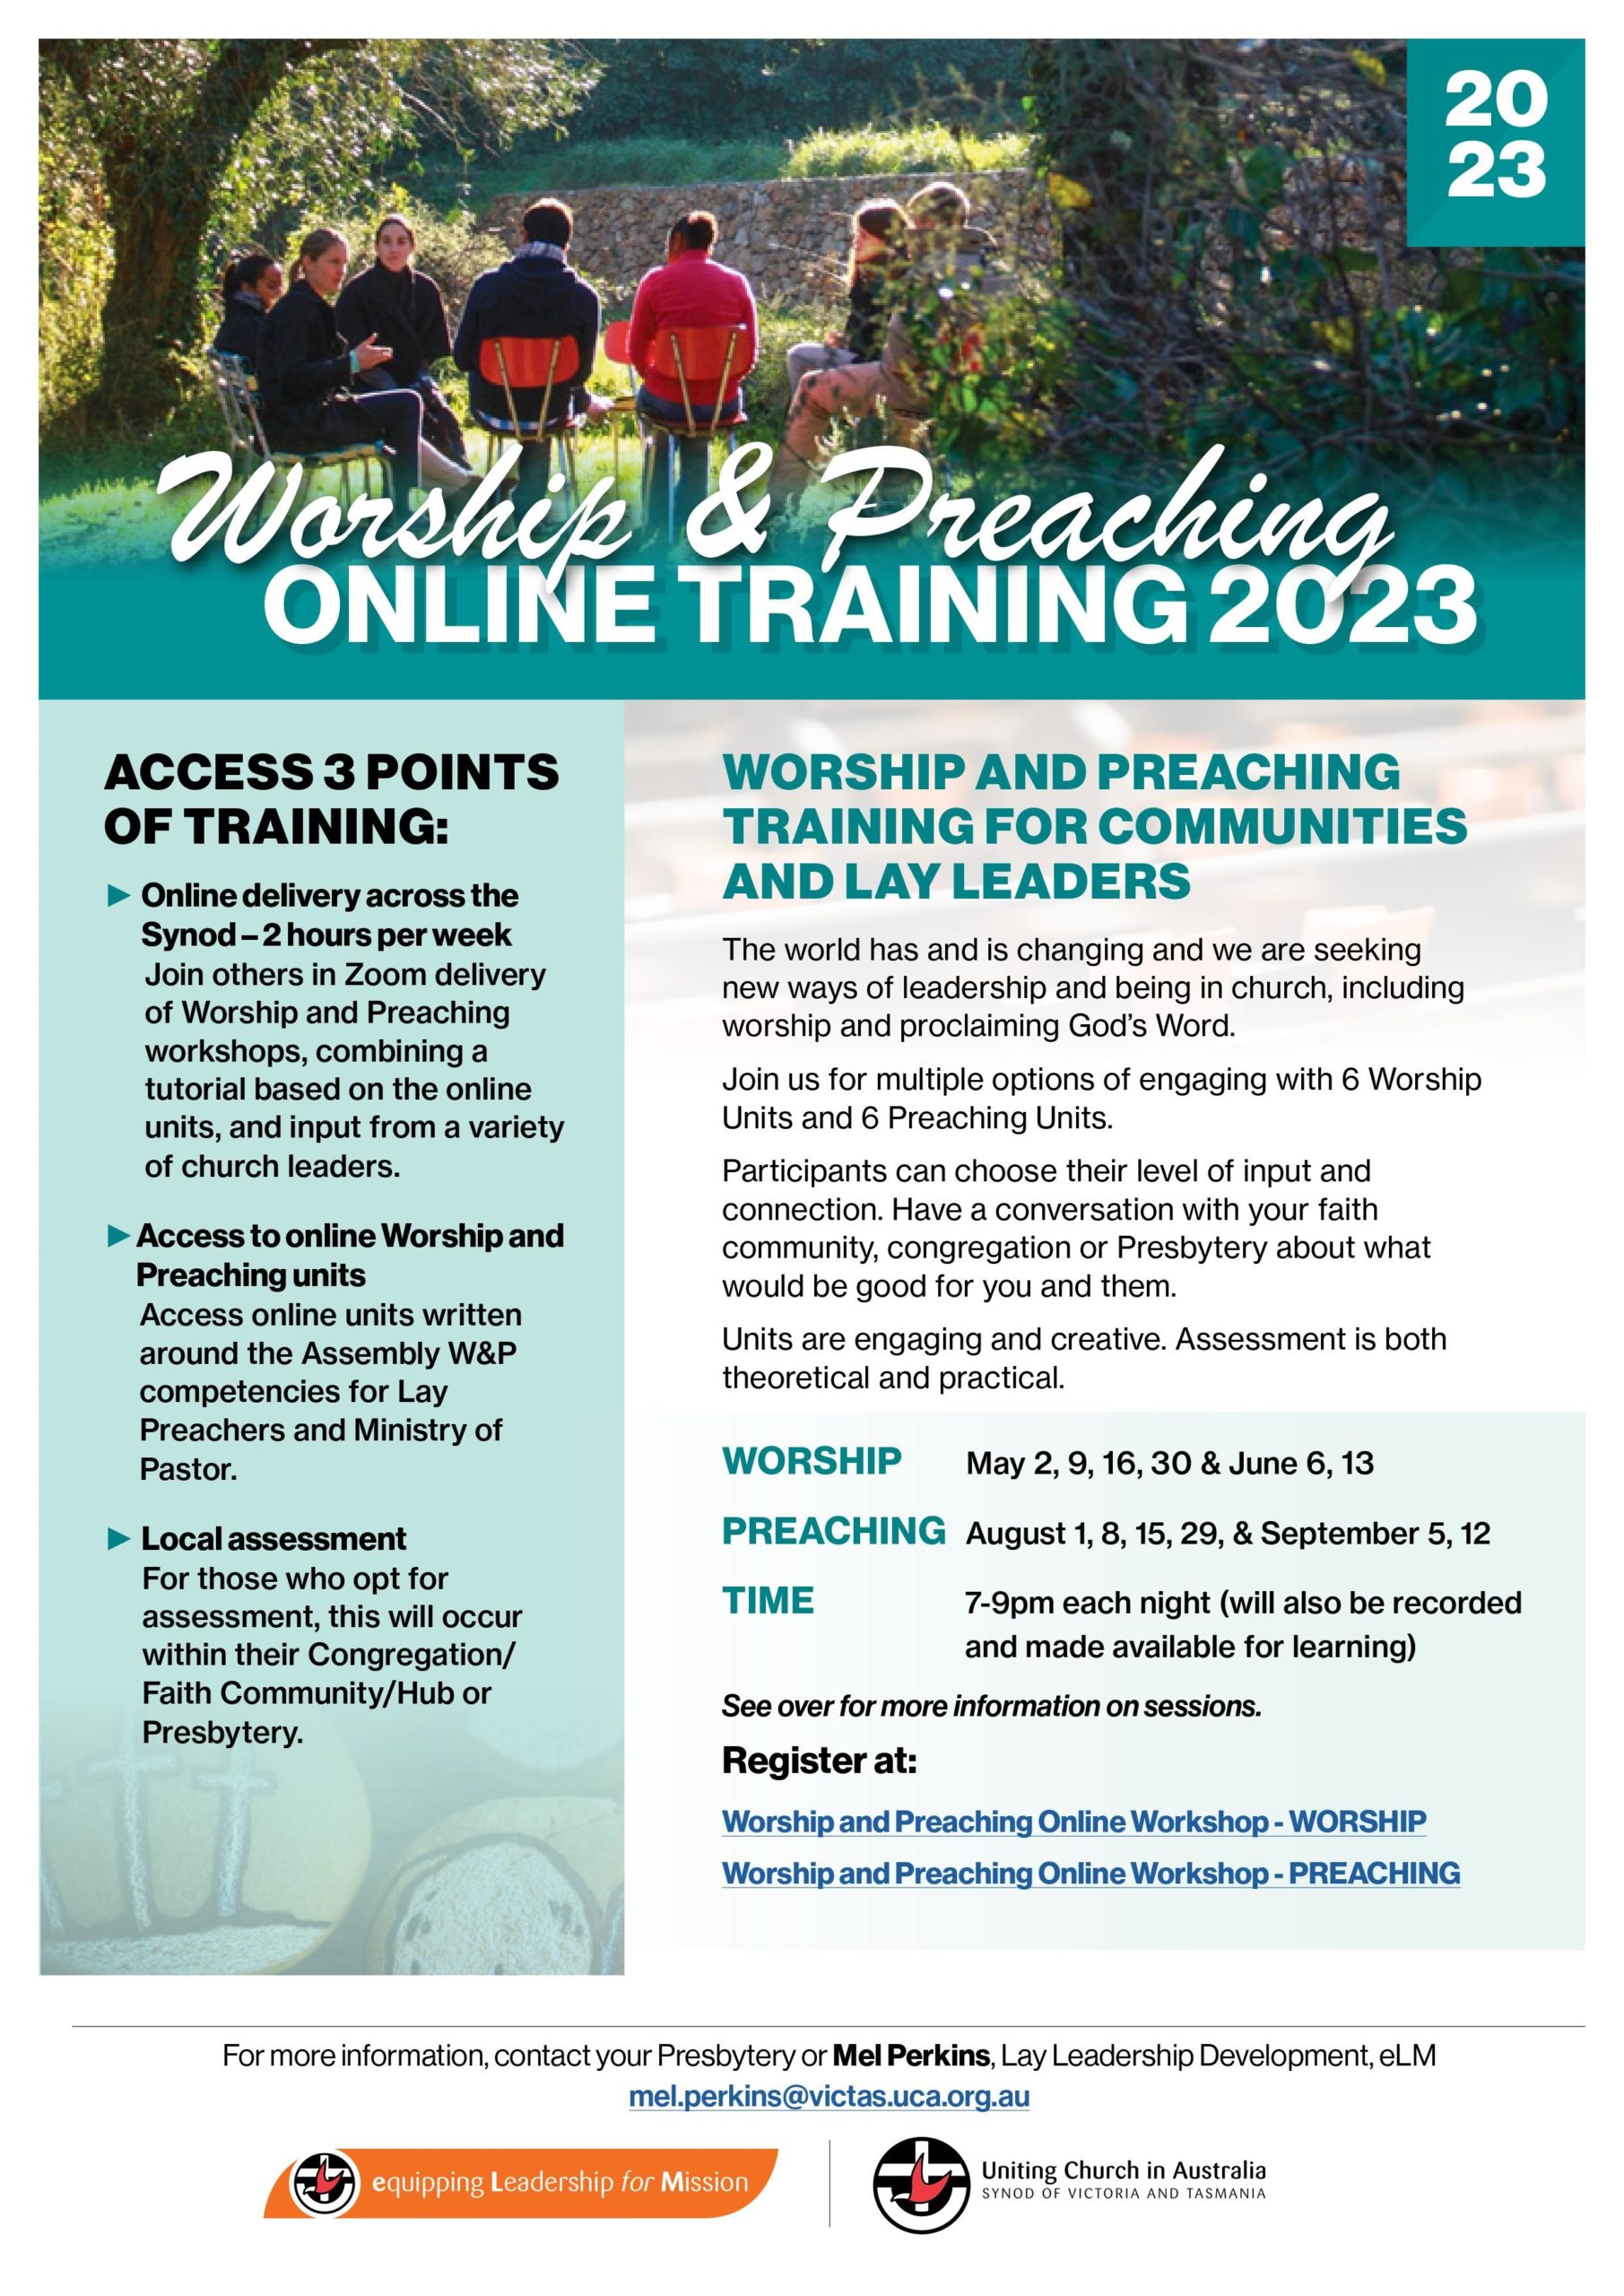 Worship and preaching online training 2023 flyer 1 scaled